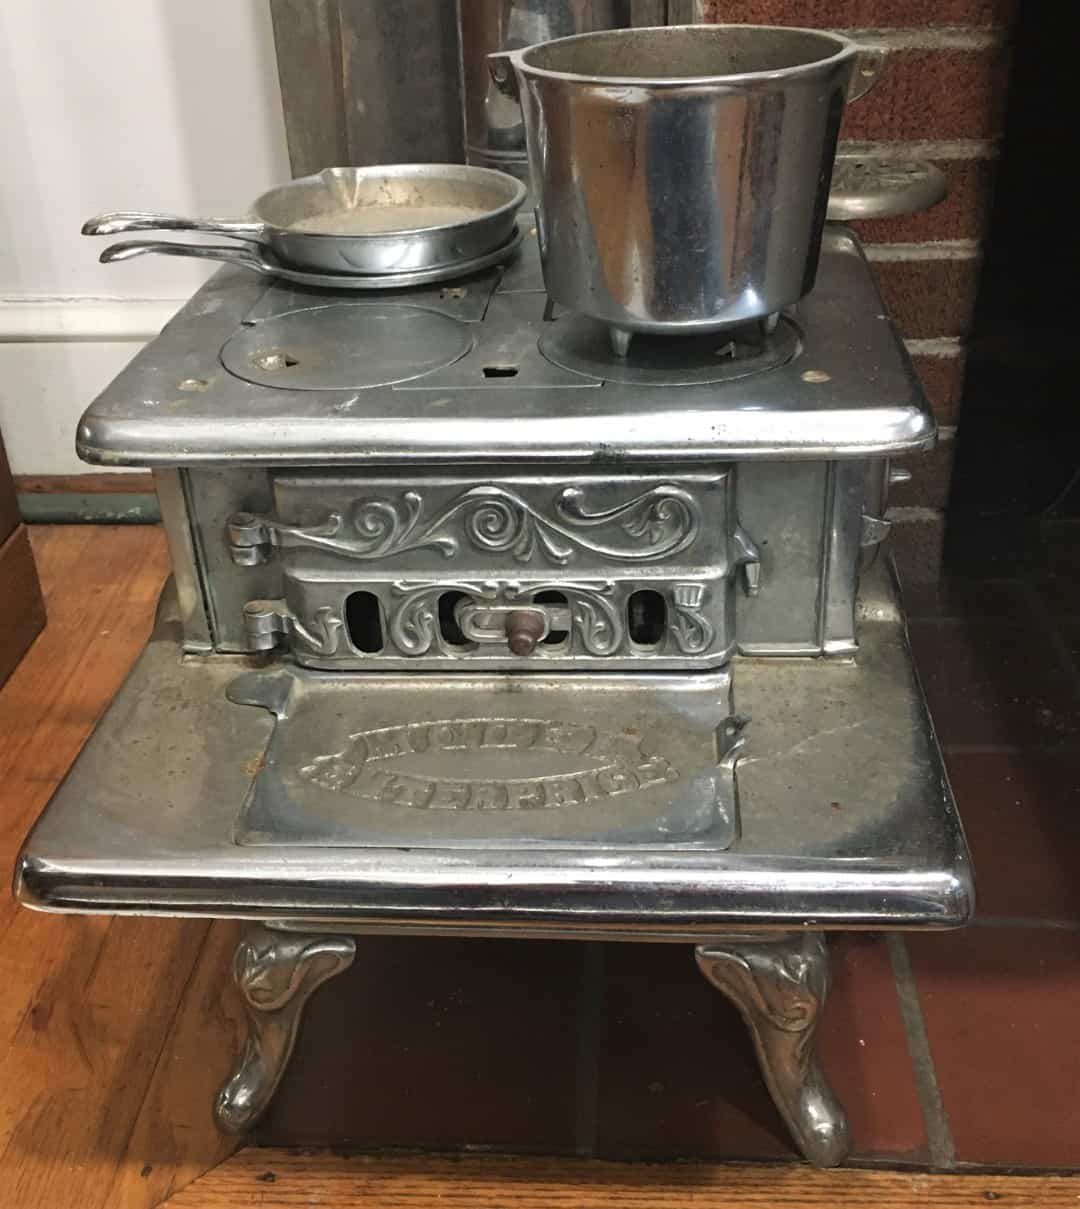 Front and cooking surface of scale model stove with skillets and pot.